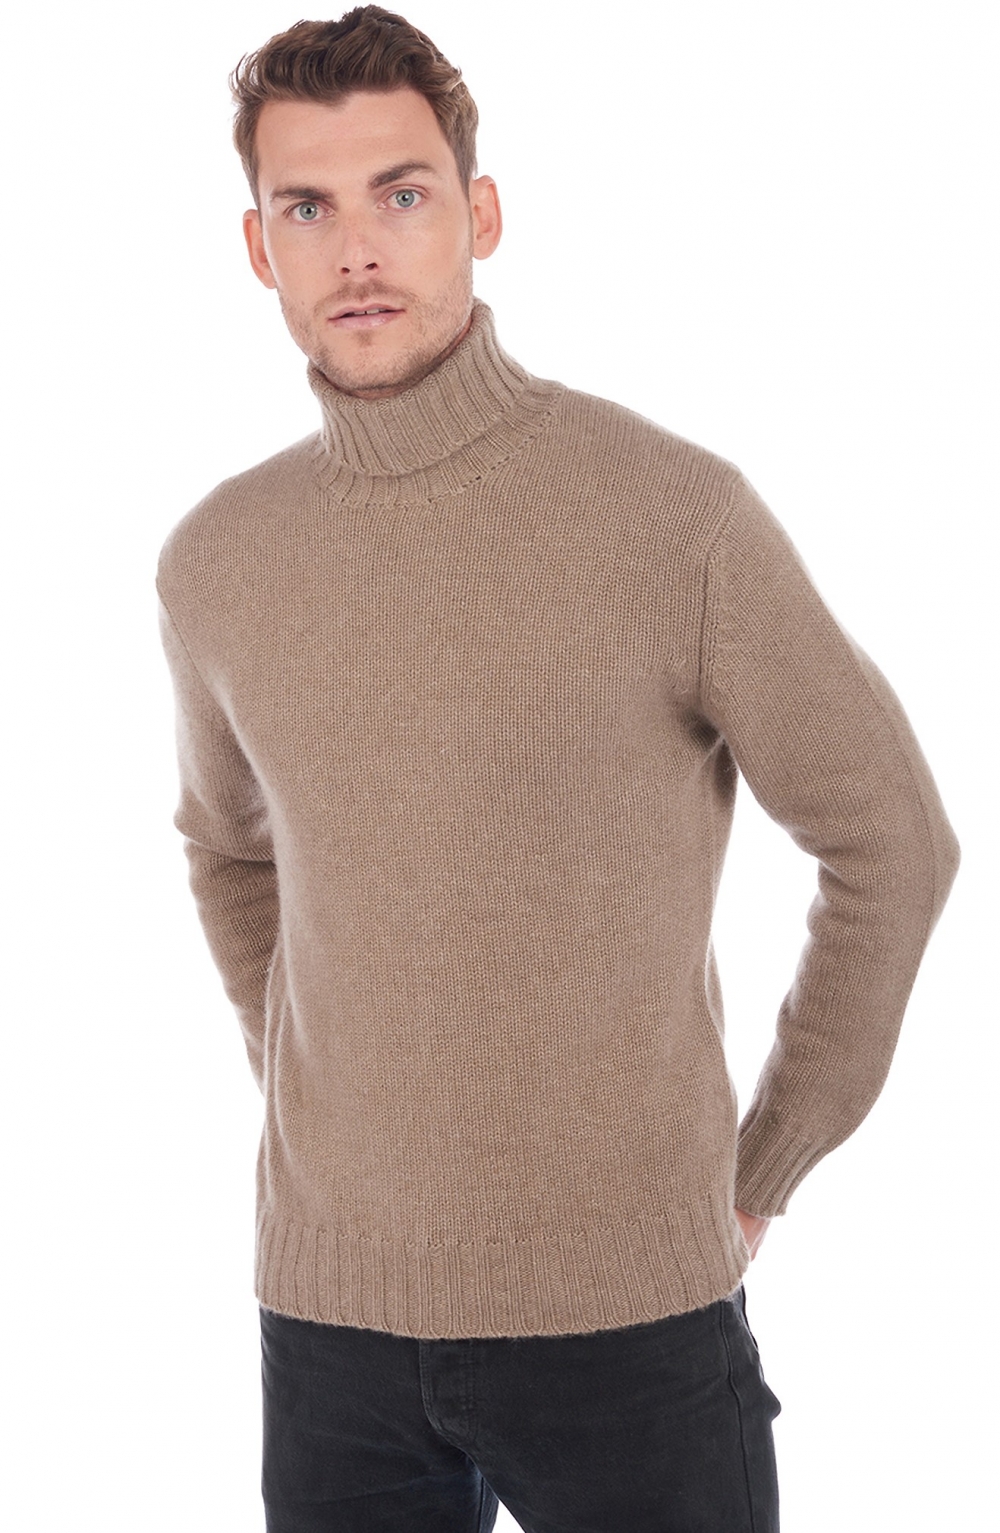 Cachemire pull homme achille natural brown 2xl